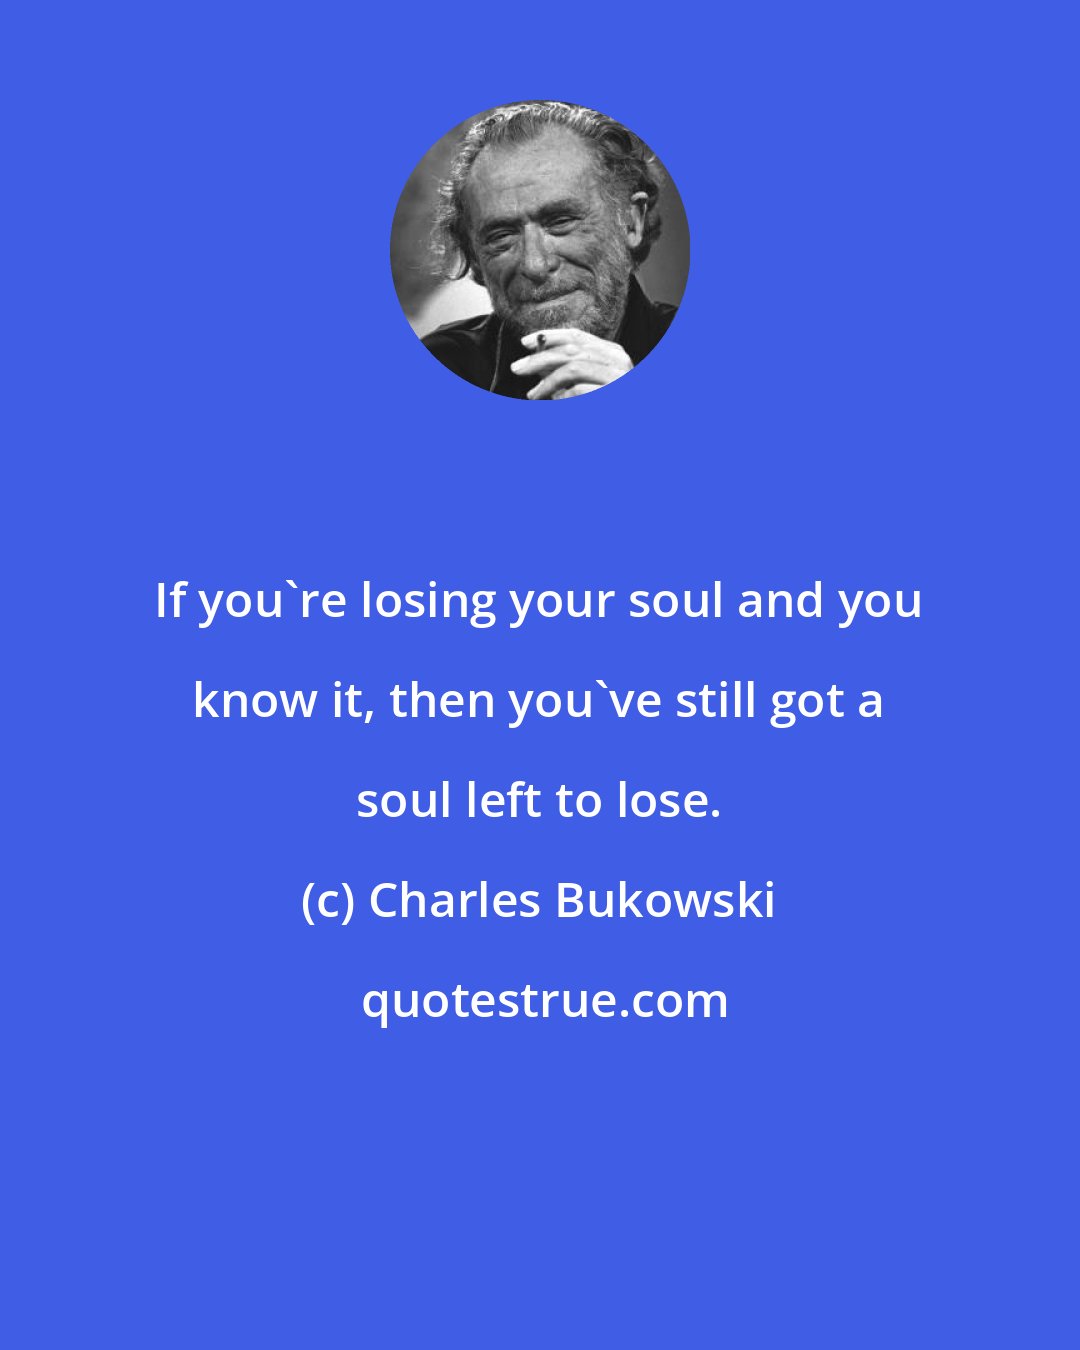 Charles Bukowski: If you're losing your soul and you know it, then you've still got a soul left to lose.